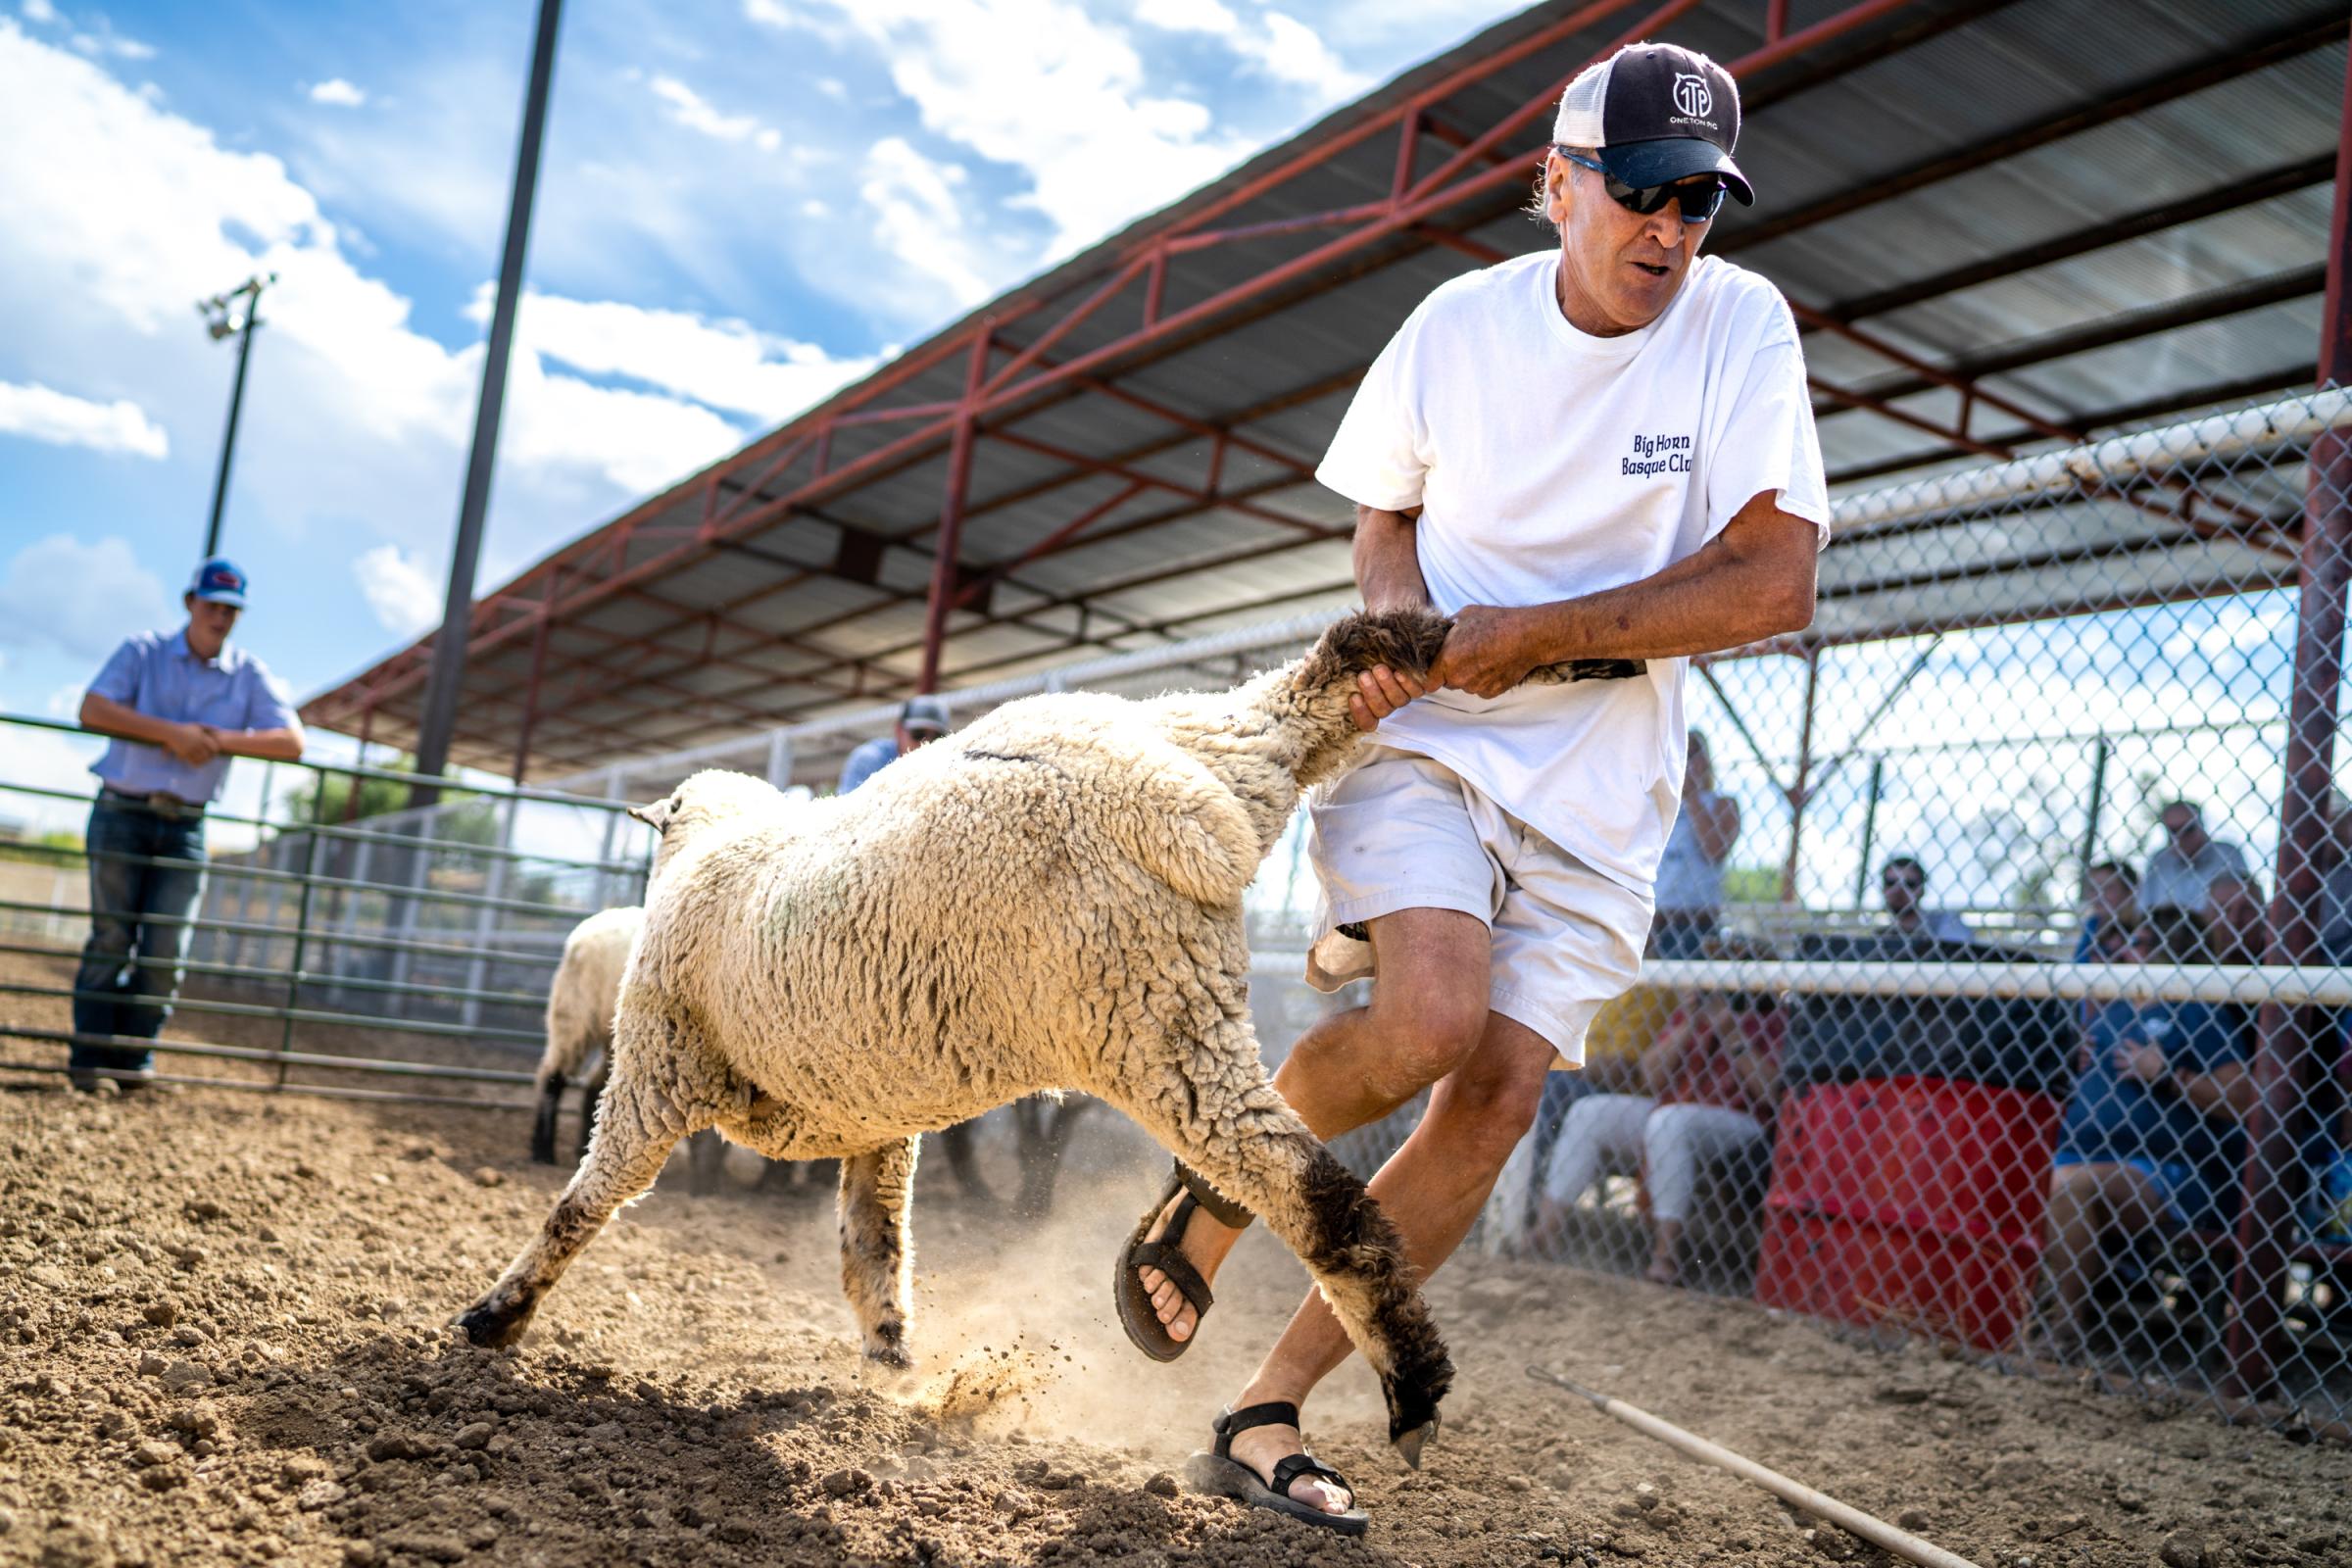 Singles - Mick Camino drags a sheep back towards a trailer during...